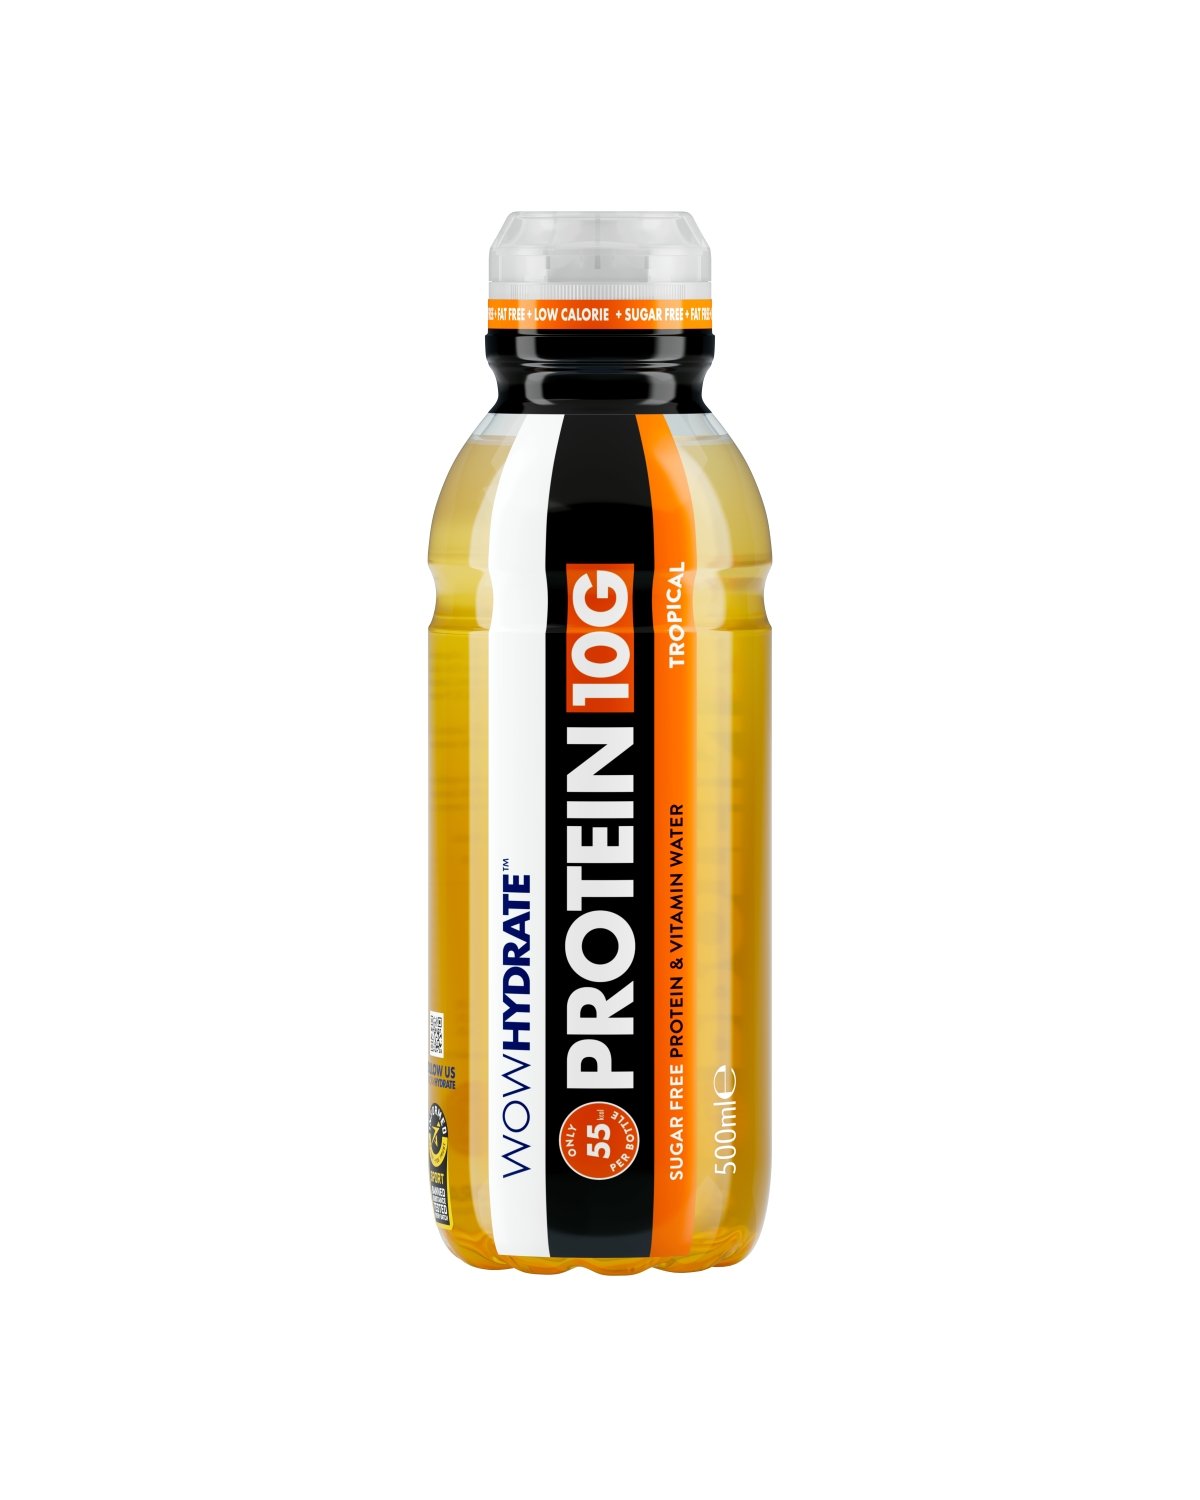 Wow Hydrate Protein Water Drink 2 Sabores - 500ml (10g de Proteína) - theskinnyfoodco